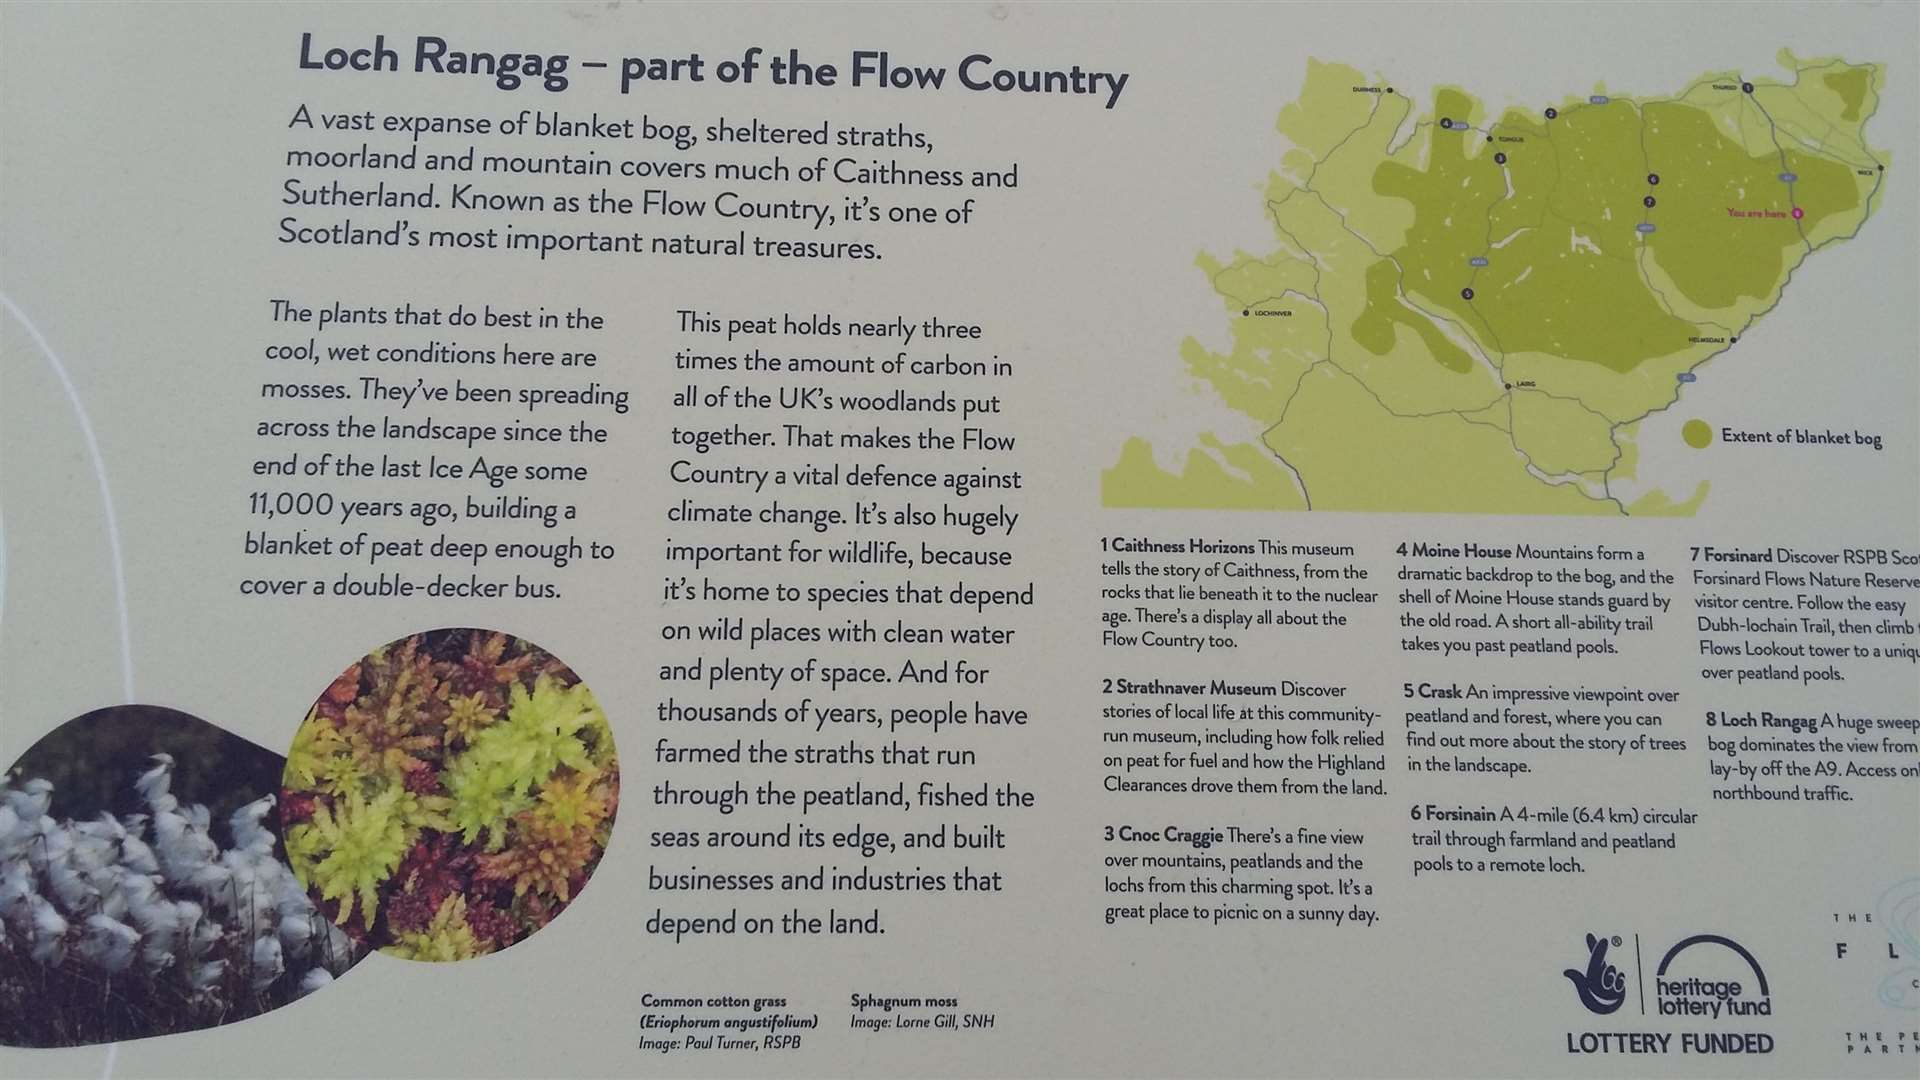 The information panel detailing Loch Rangag and the Flow Country.